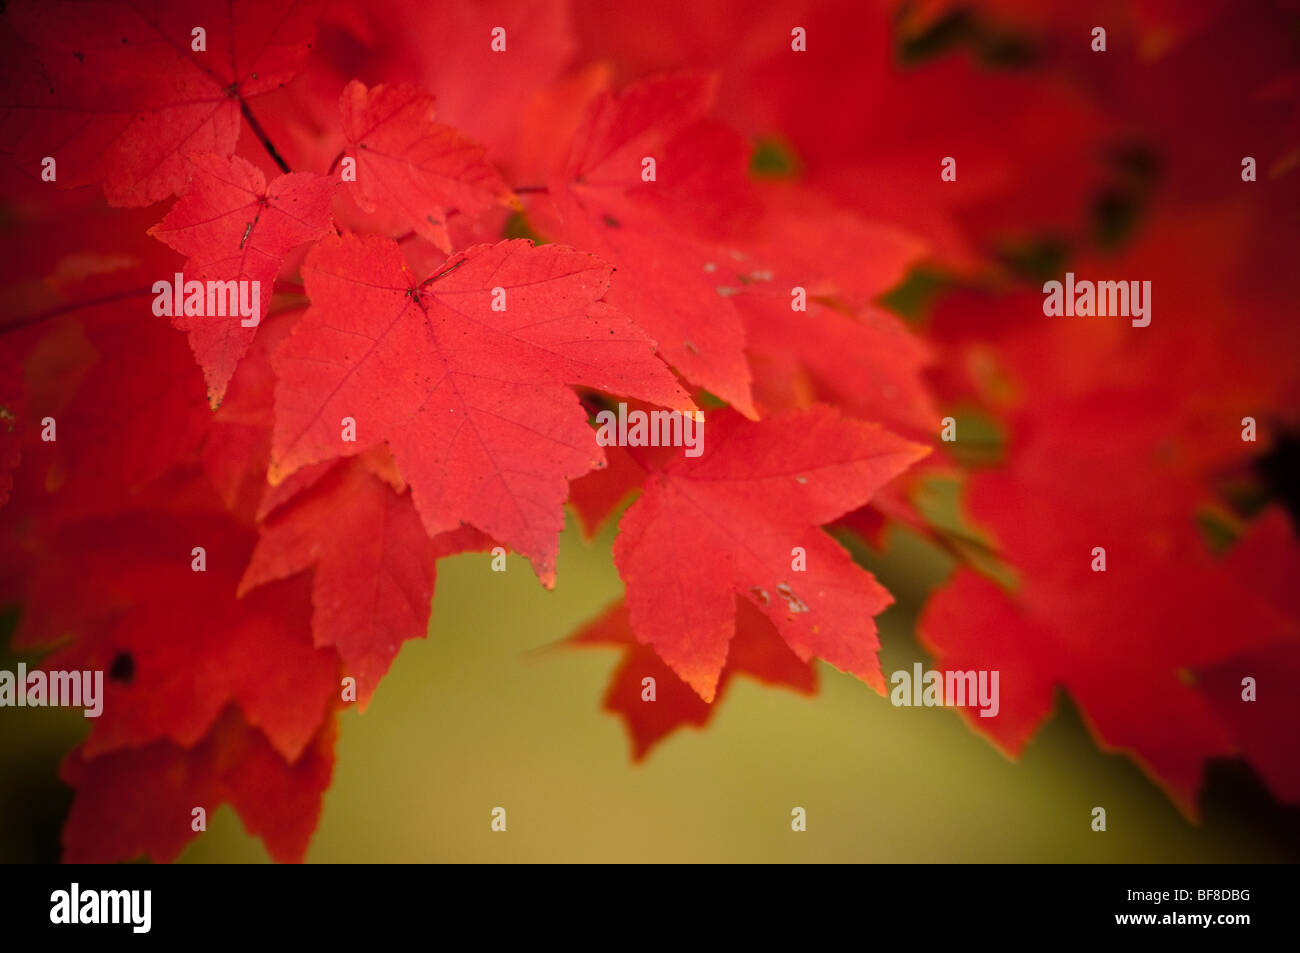 Intense Red maple leafs Stock Photo